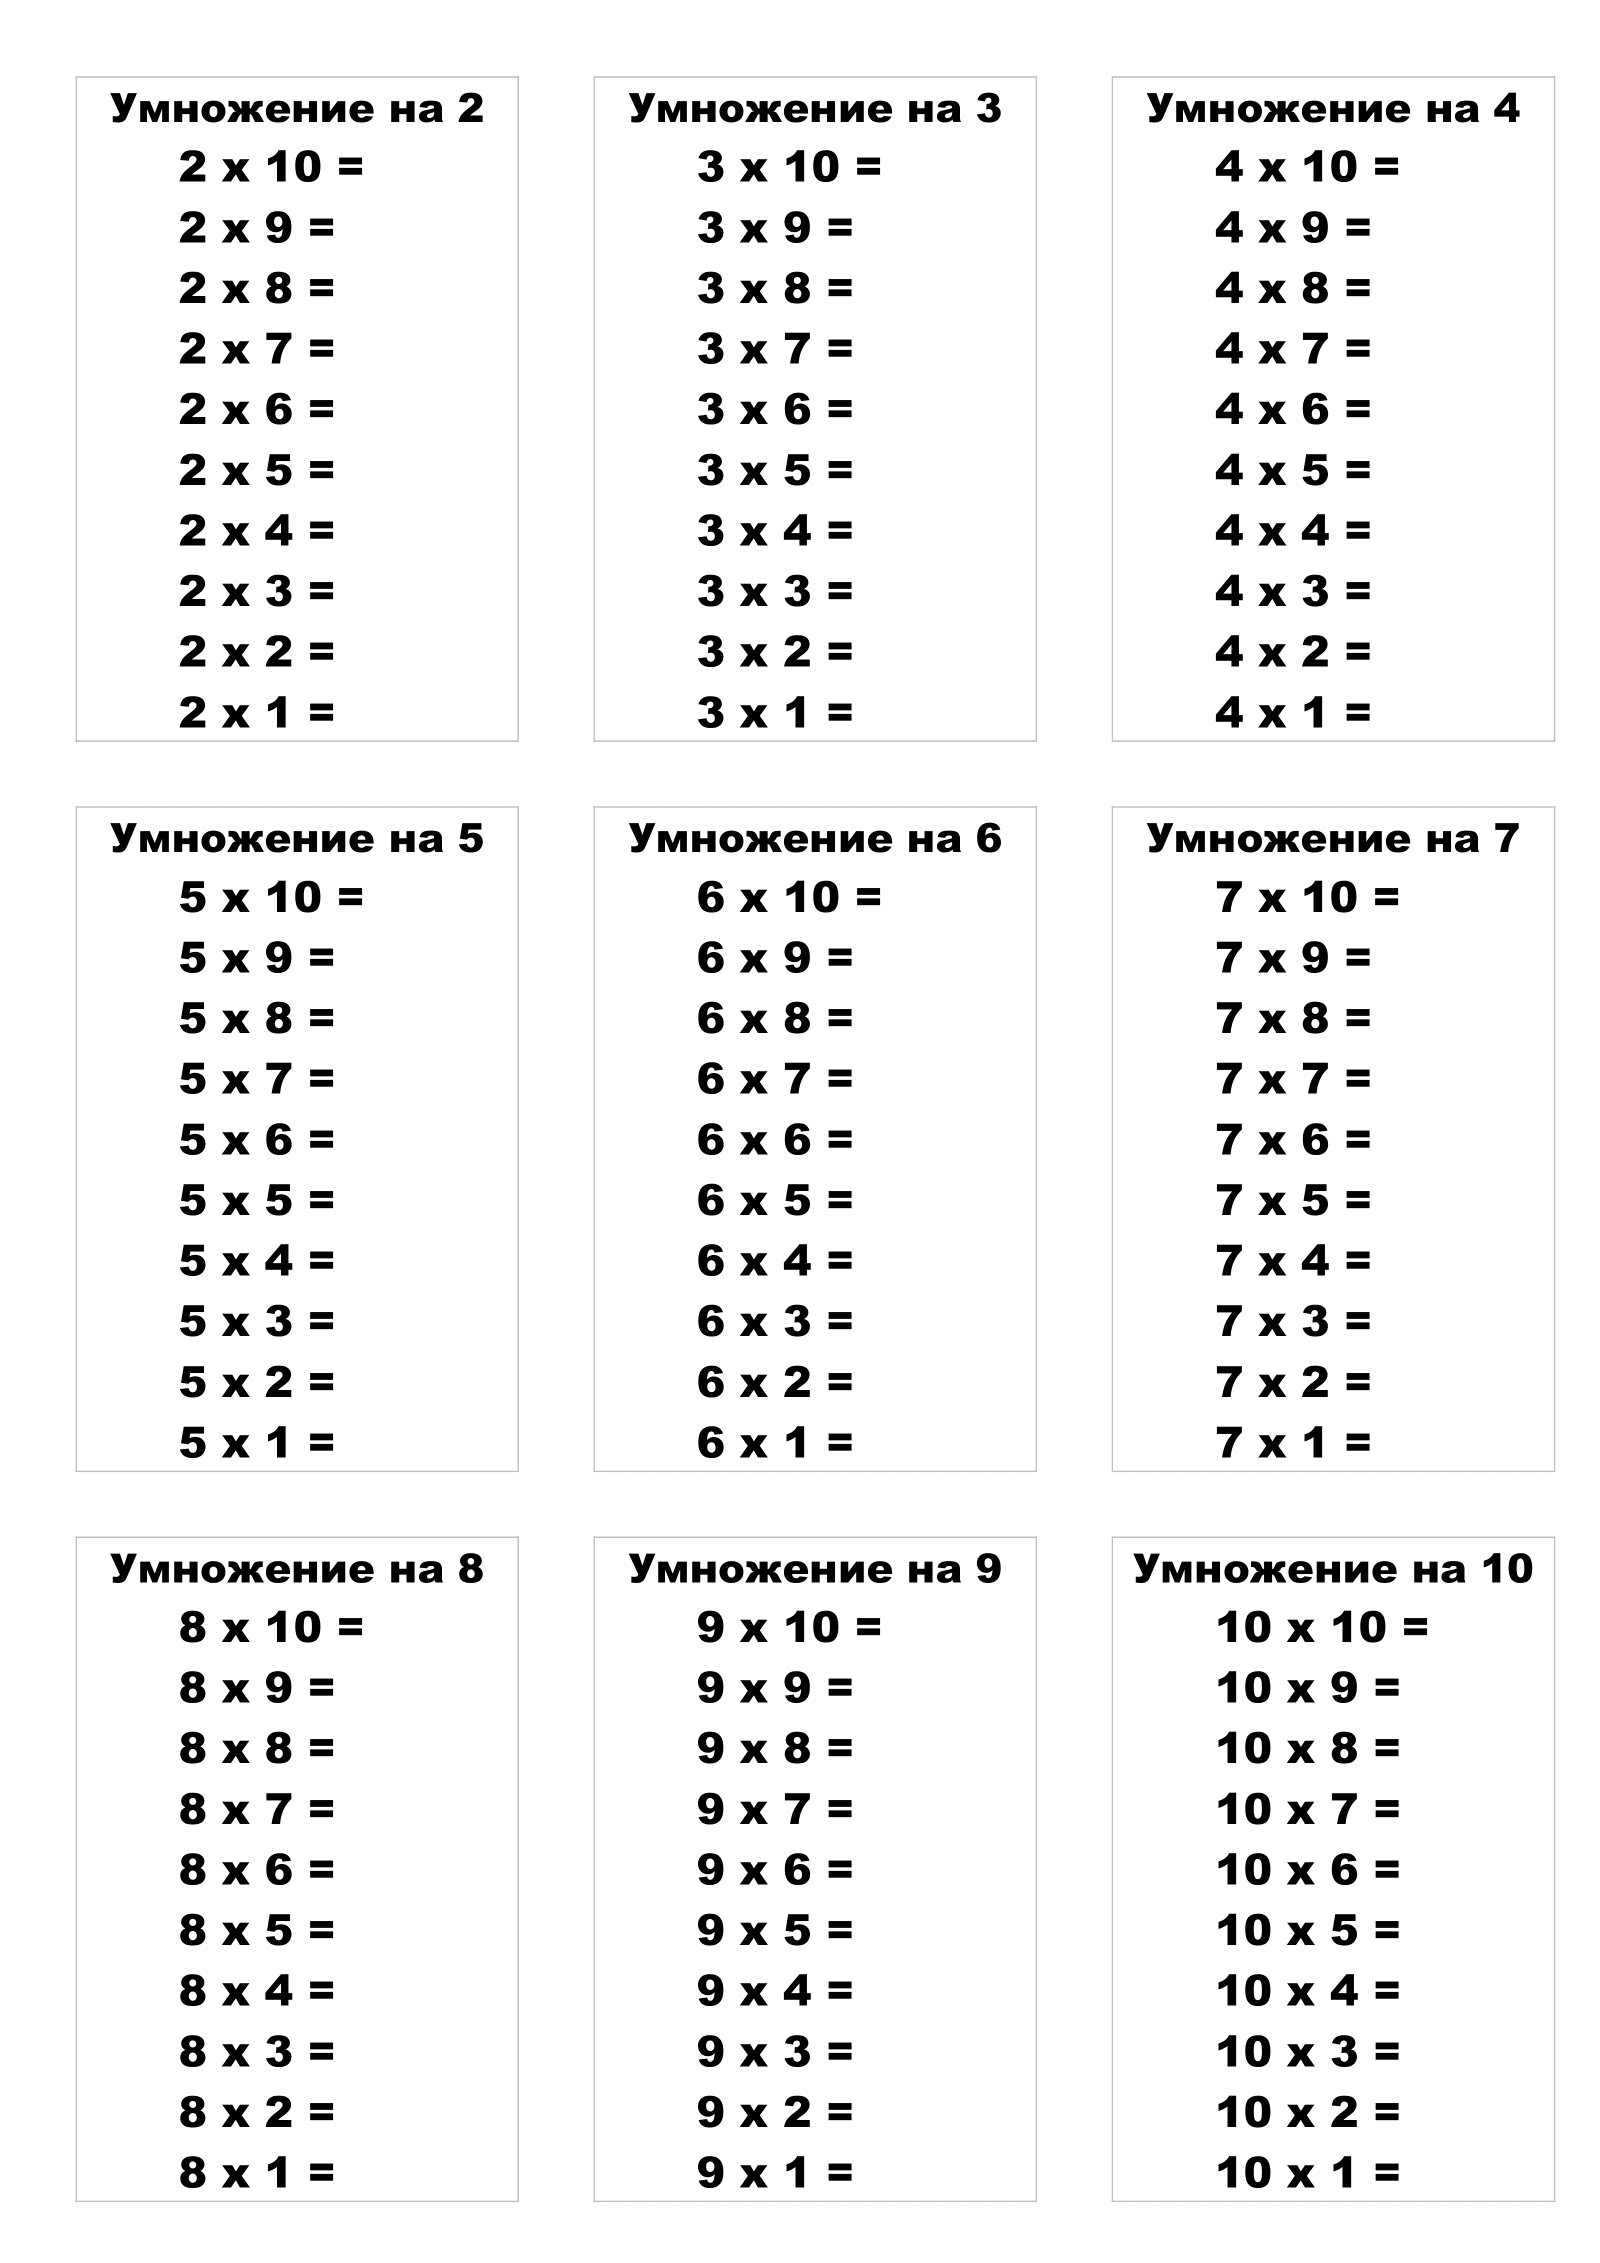 Multiplication Table Without Answers in Descending Order. Print